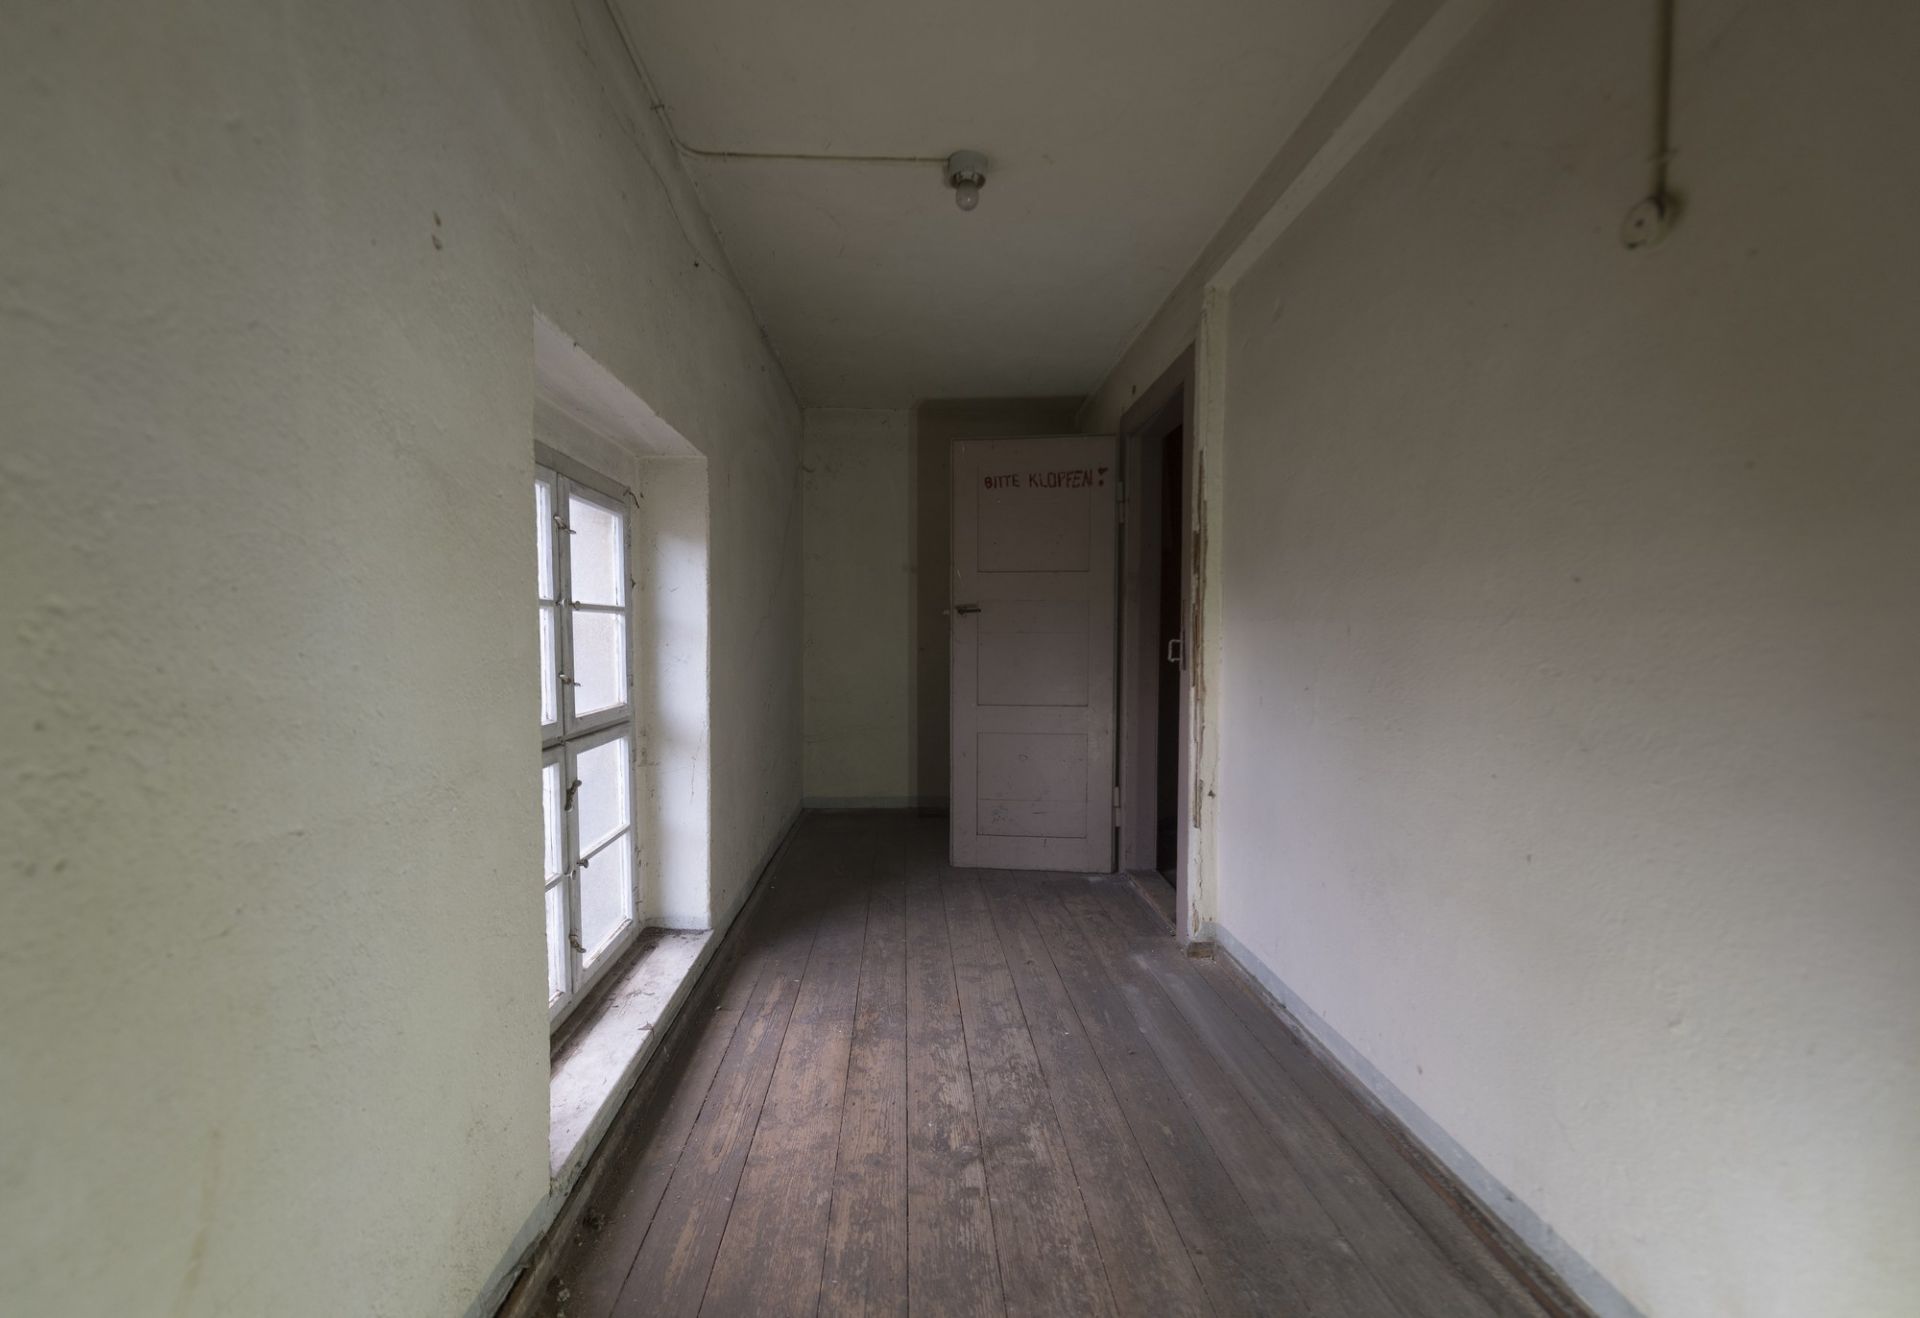 LARGE FORMER GUEST HOUSE IN NOSSEN, GERMANY - Image 36 of 47